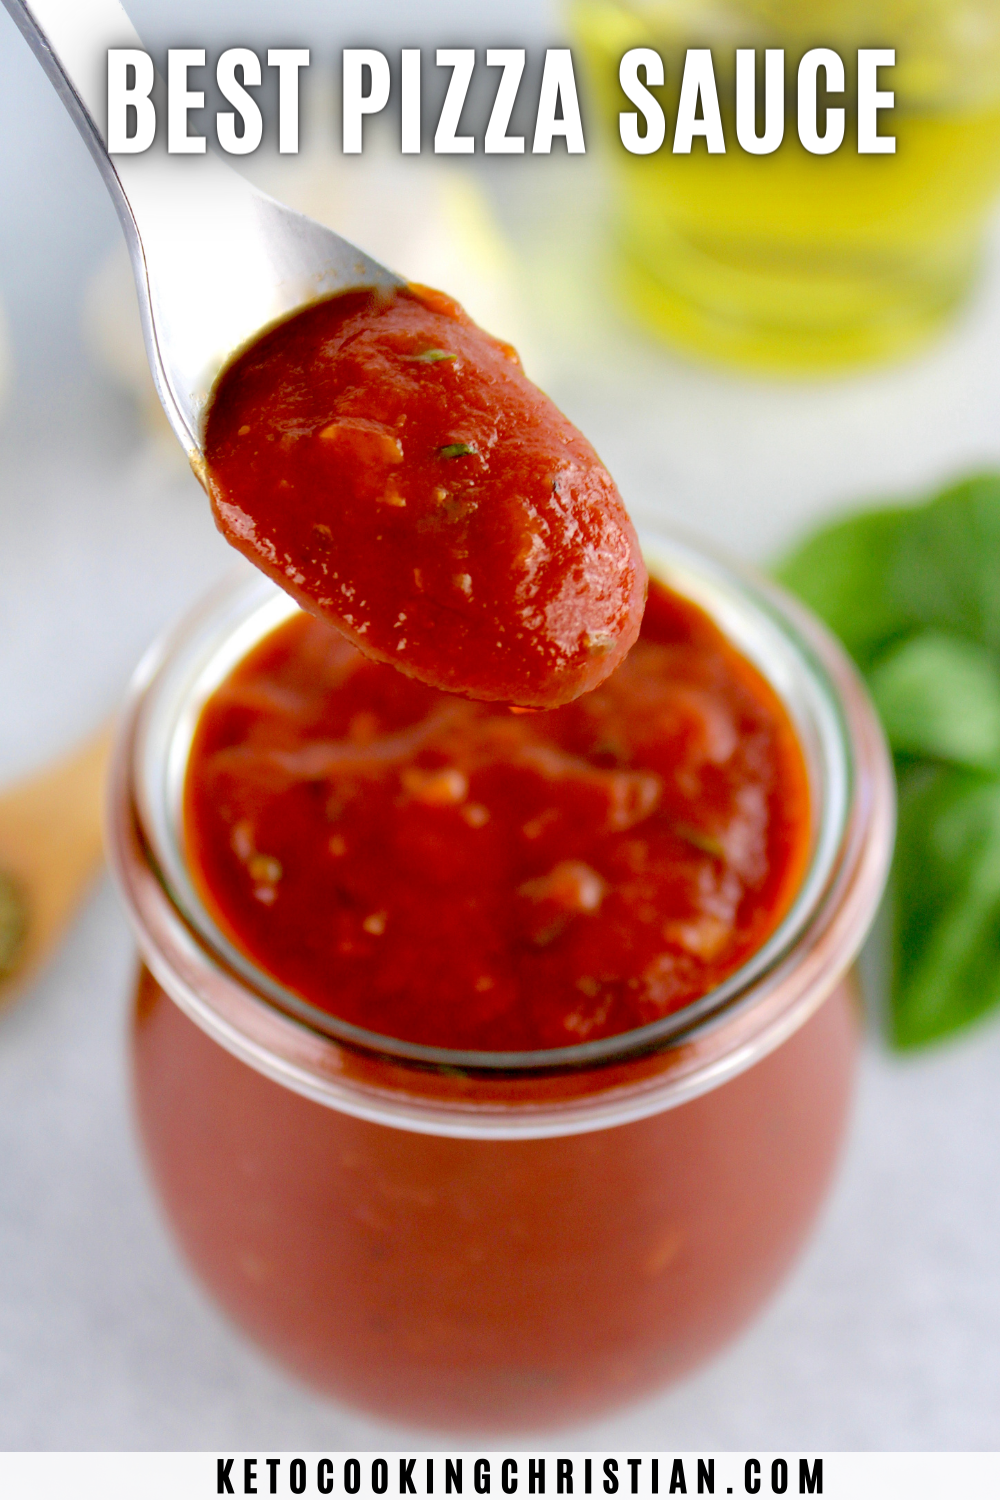 Best Pizza Sauce - Keto Cooking Christian